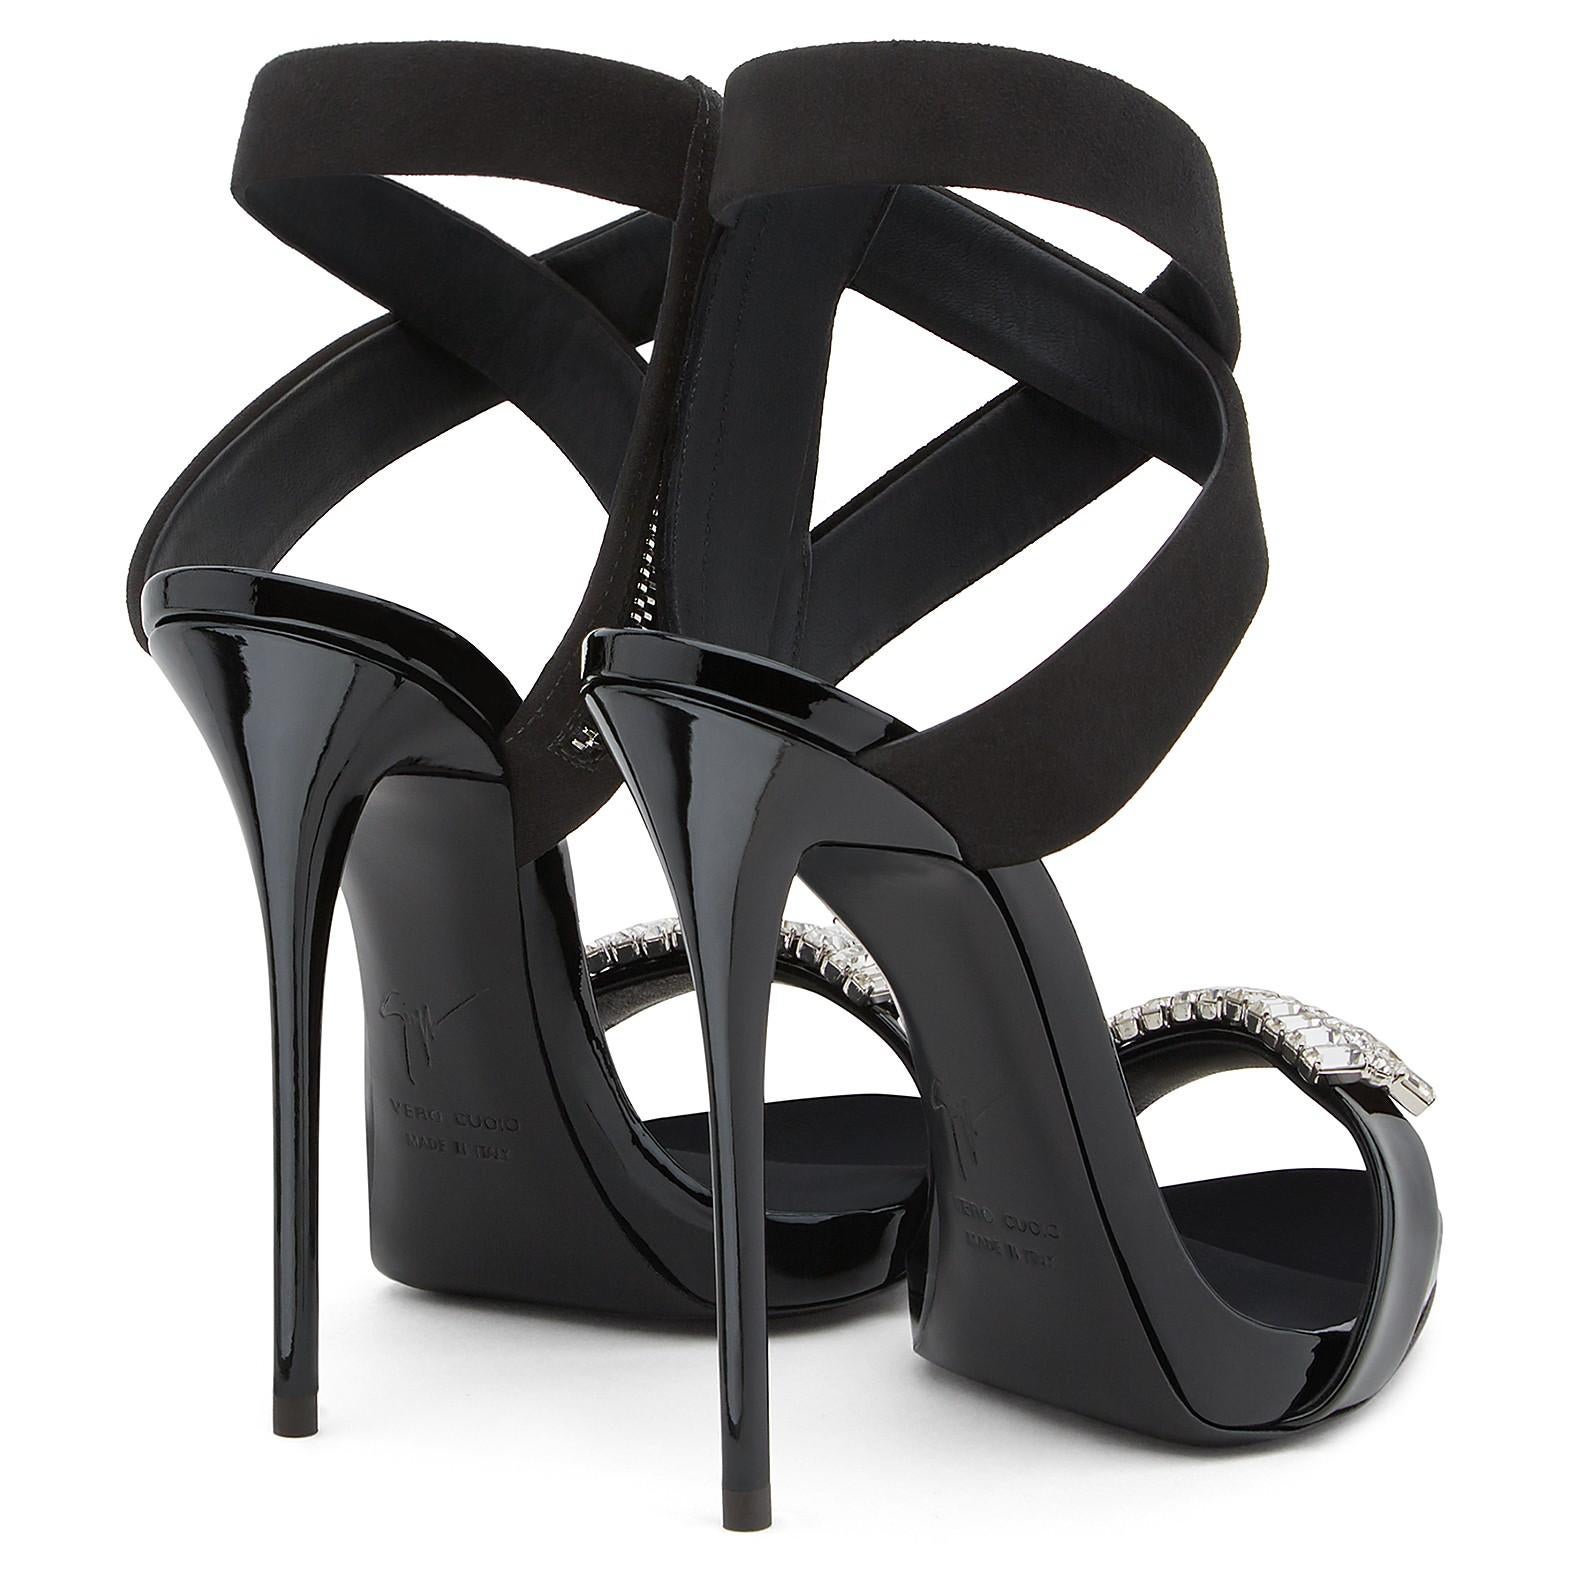 Giuseppe Zanotti NEW Black Suede Patent Crystal Evening Sandals Heels in Box 2